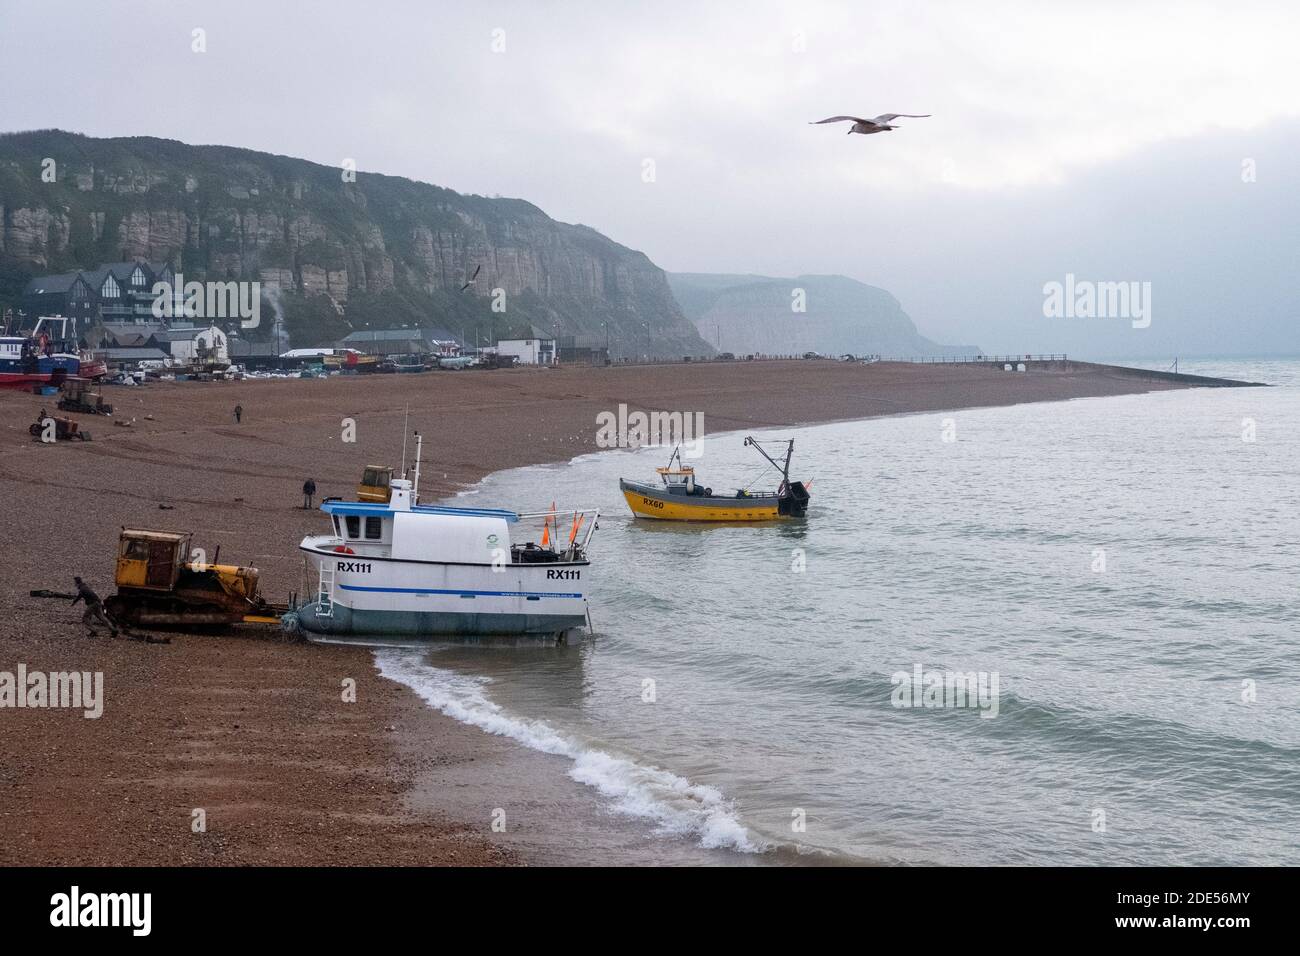 Hastings, East Sussex, UK. 29th November 2020. Hastings fishing boats put out to sea at dawn on a chilly grey Sunday morning. Stock Photo